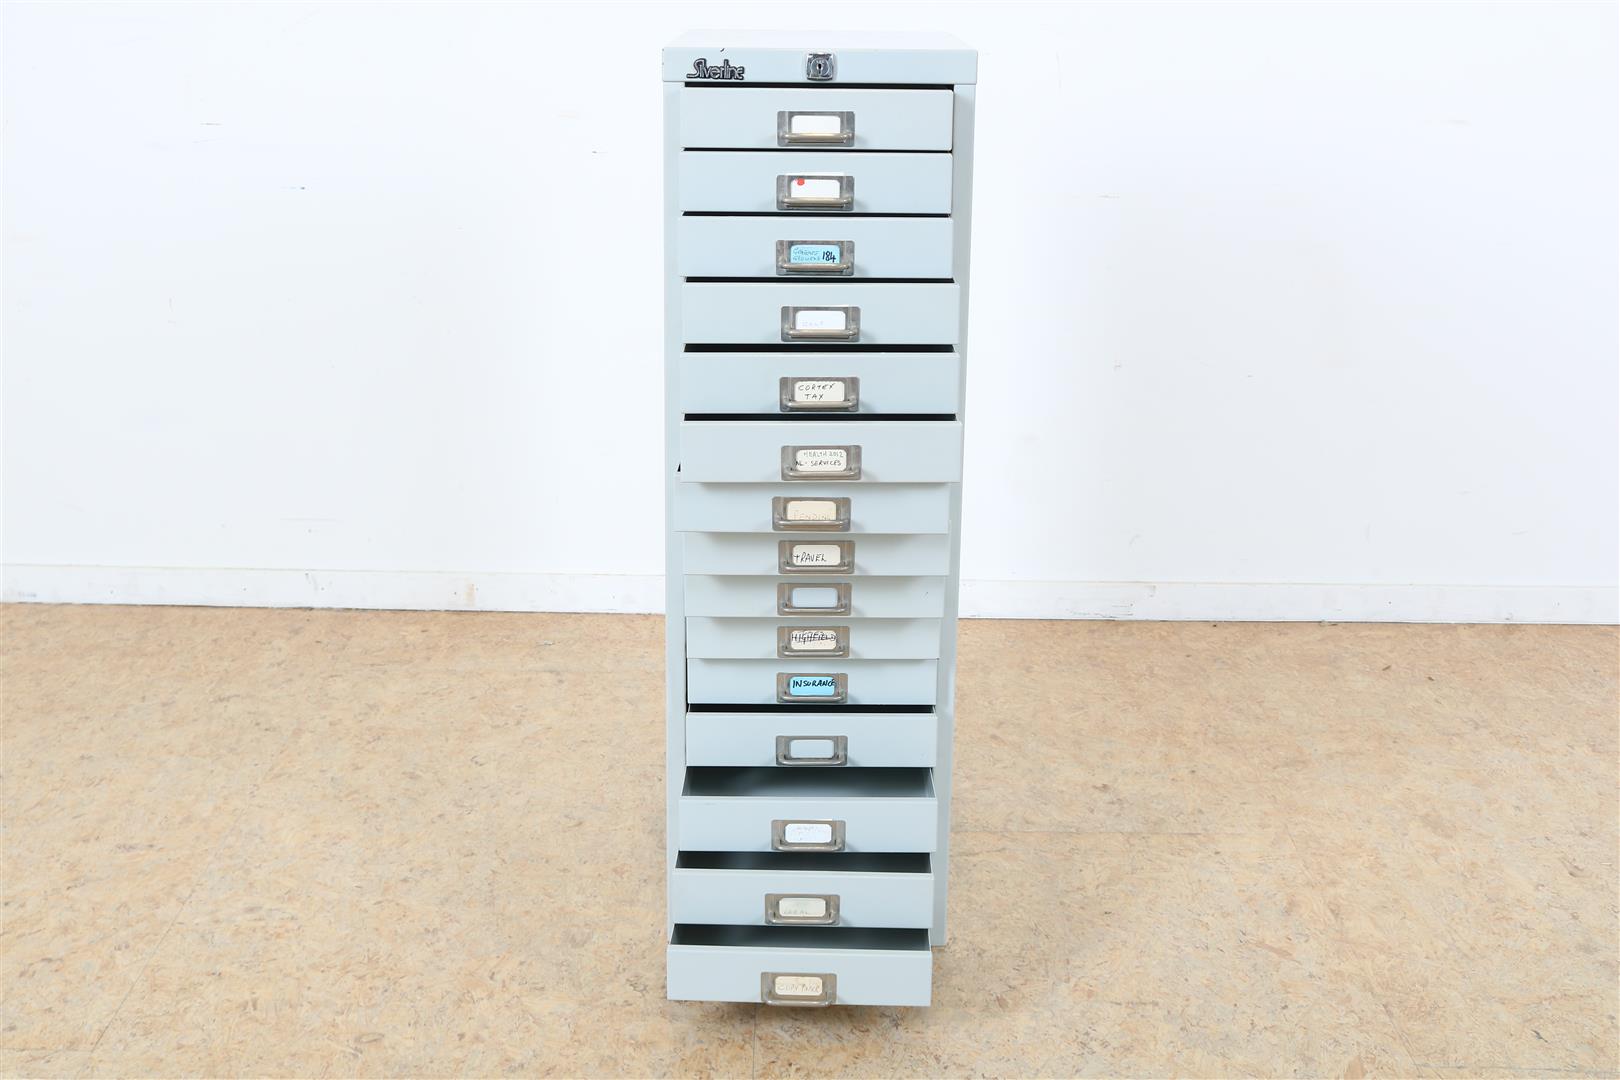 Metal filing cabinet with 15 drawers, Silverline label, 87 x 41 x 28 cm. (key missing) - Image 2 of 3